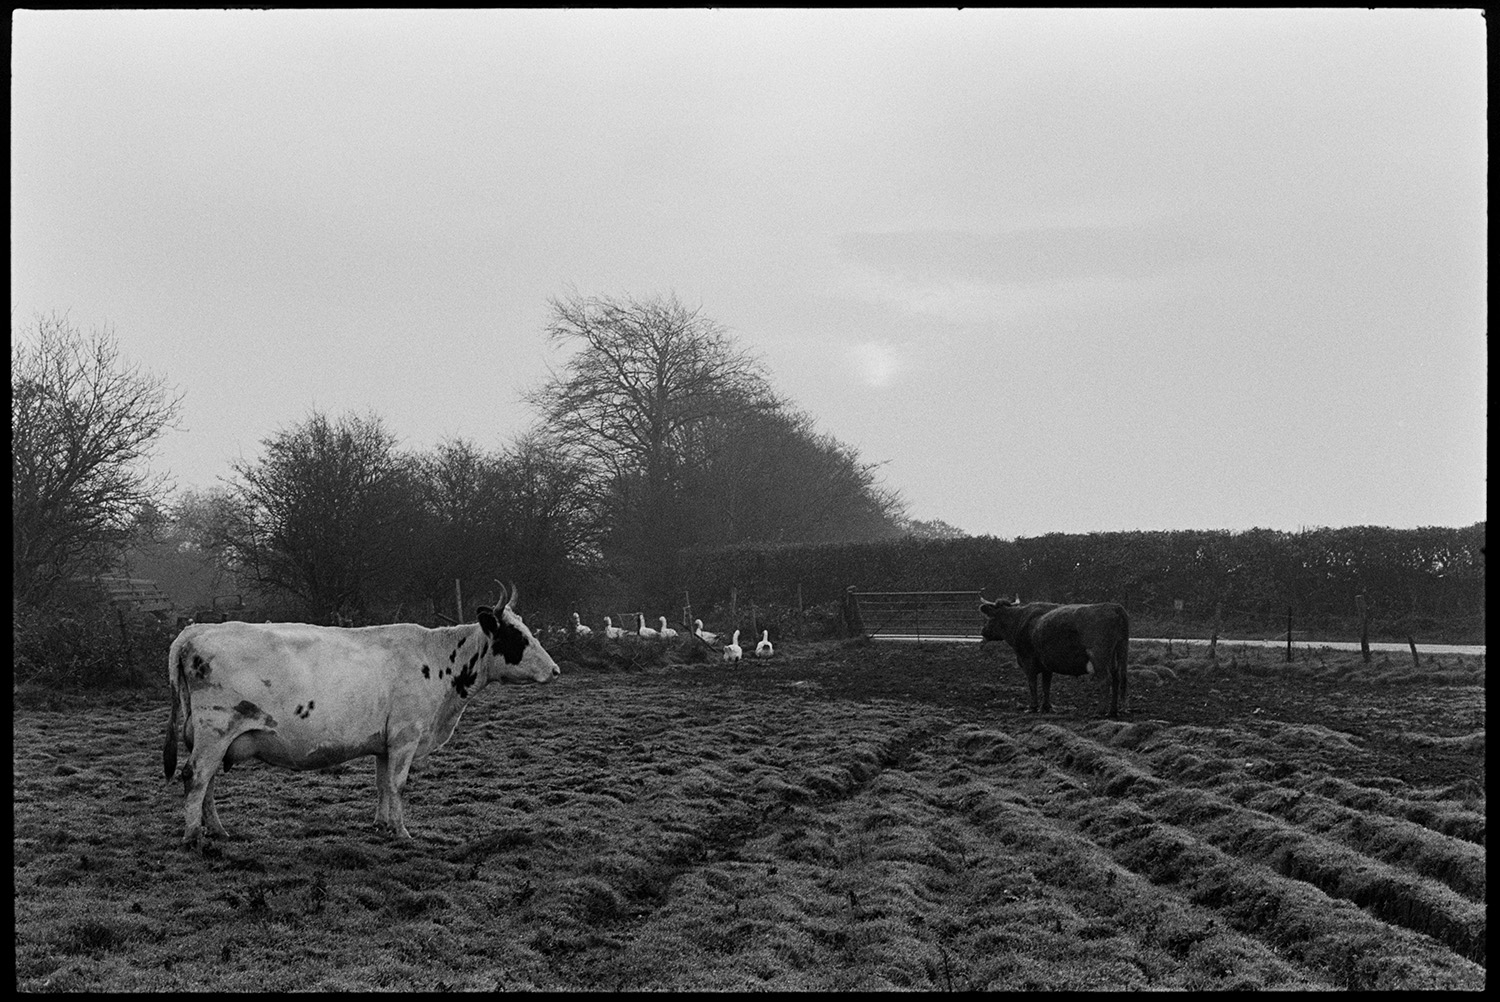 Cows, goats, geese at farm.
[Two horned cows and flock of geese in a rutted field at Cuppers Piece, Beaford, with a road and a line of trees in the background.]